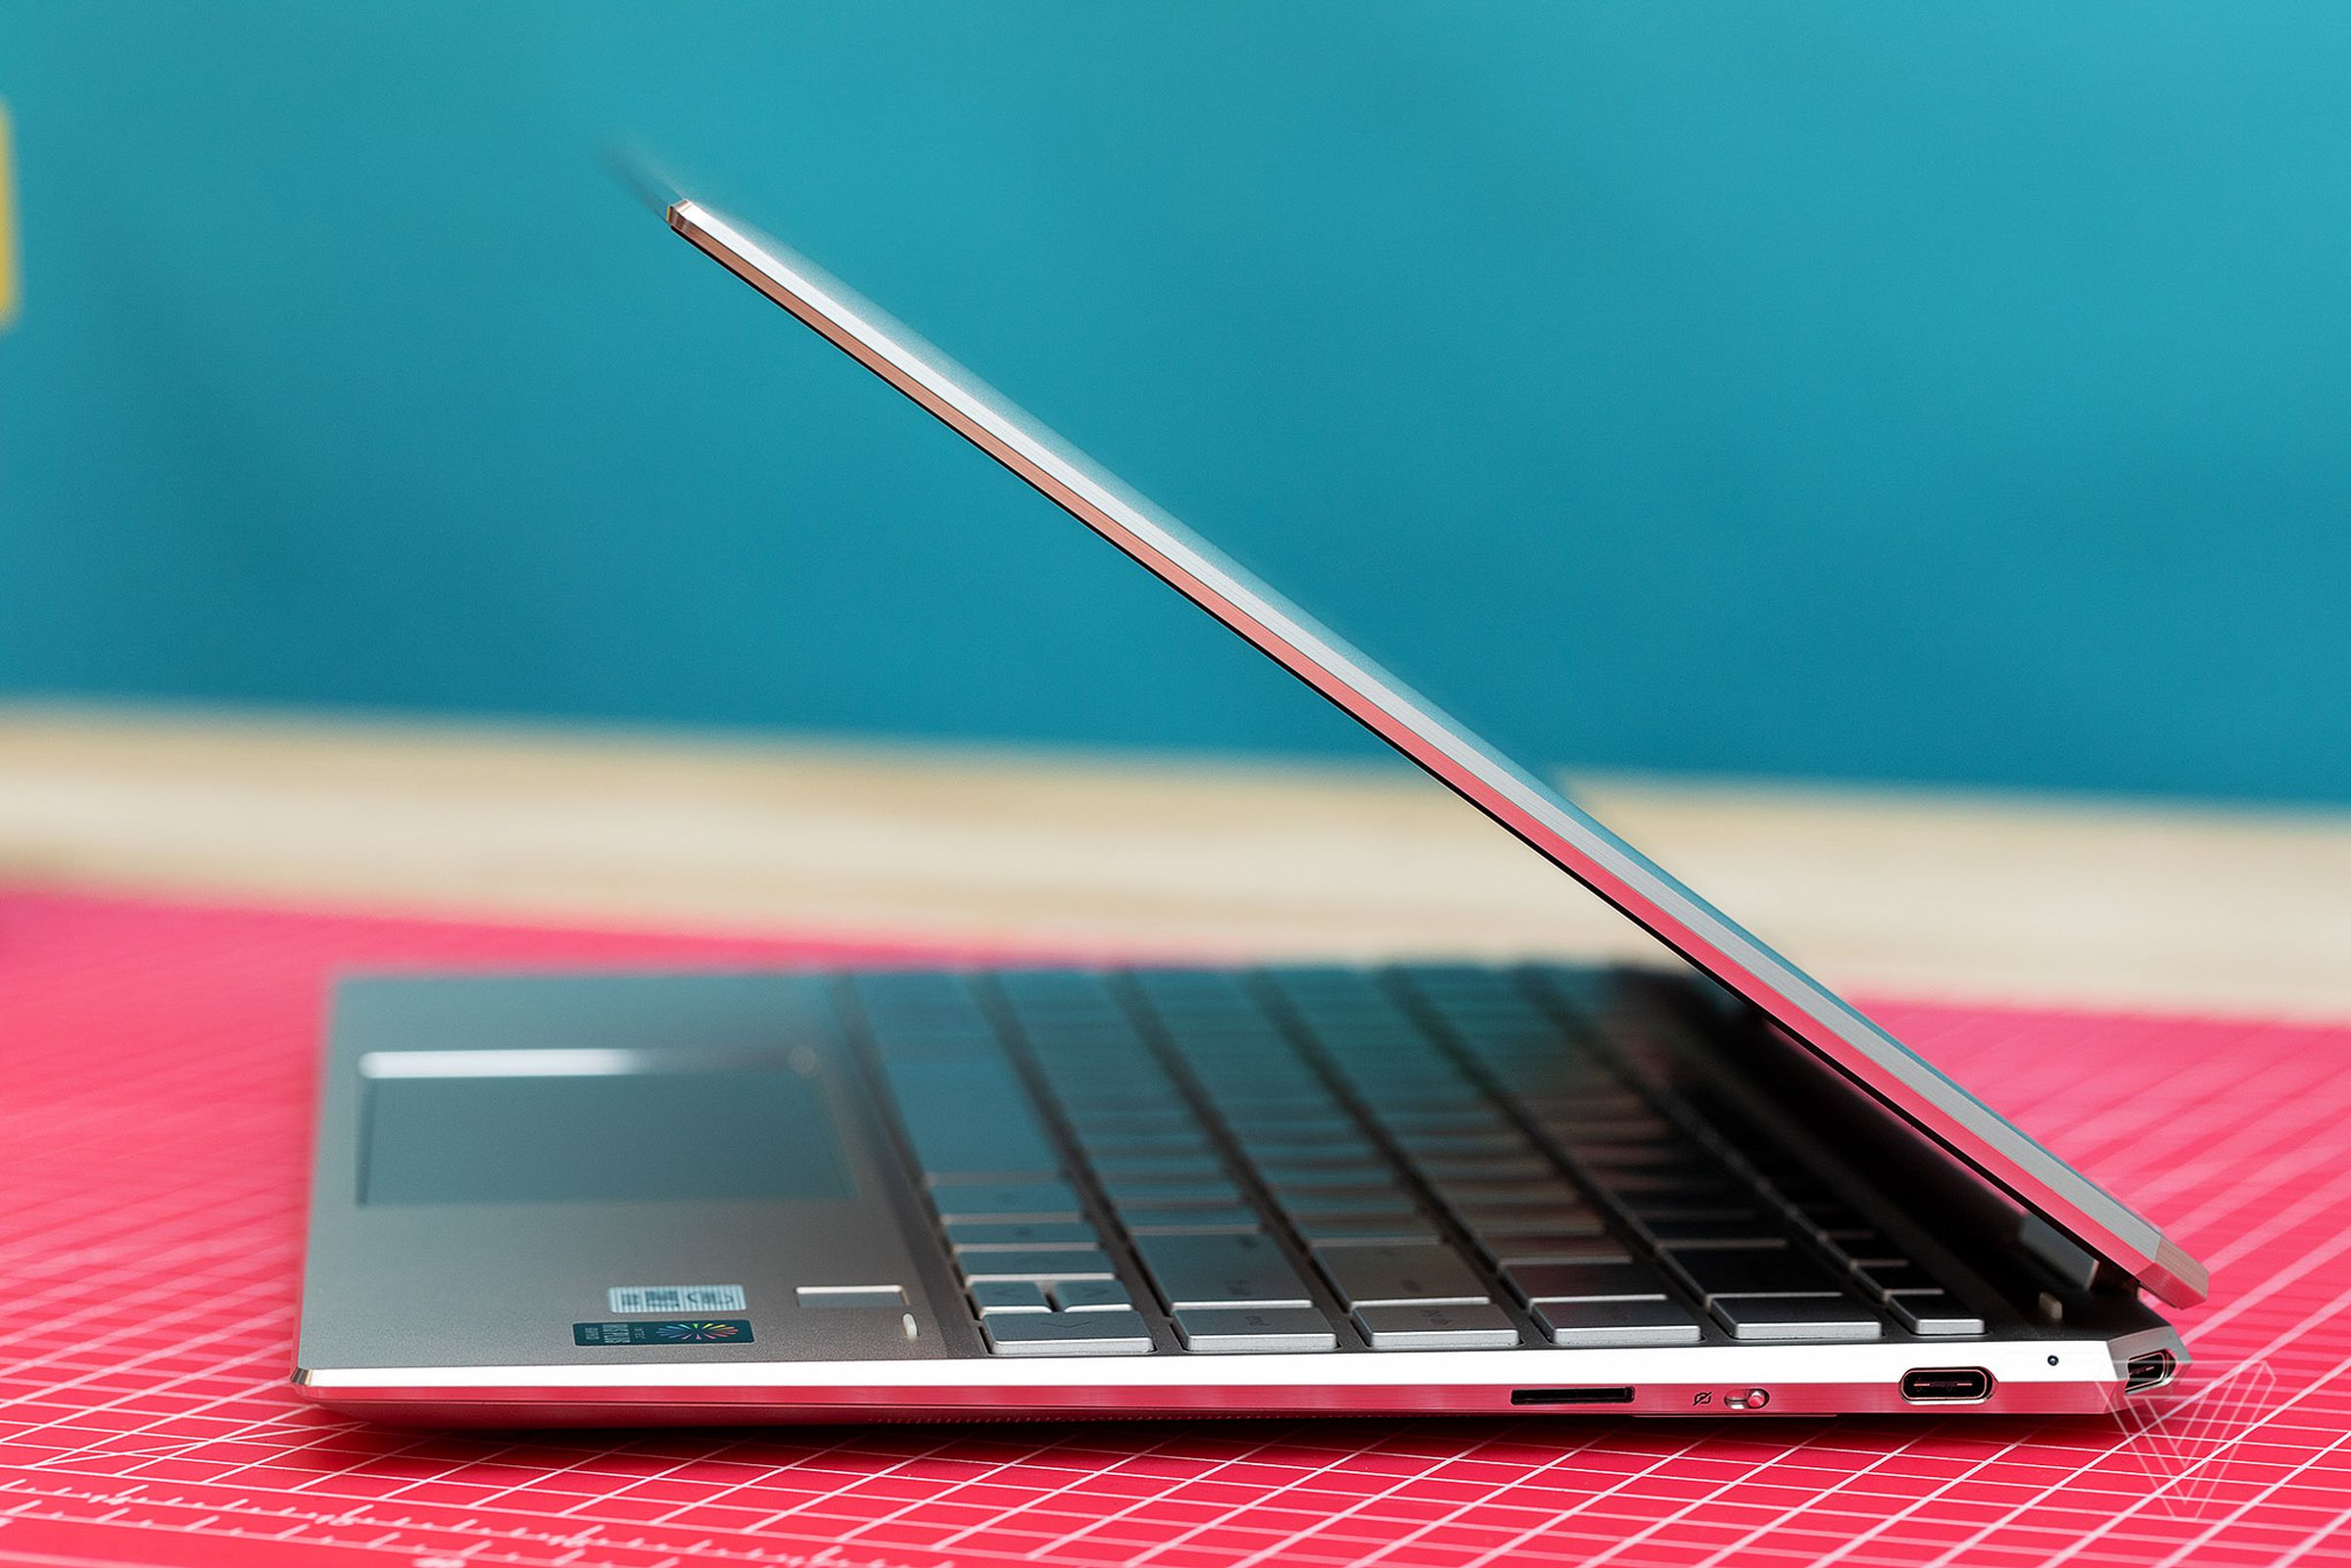 The Spectre x360 13 has a smaller footprint than Dell’s XPS 13 2-in-1.